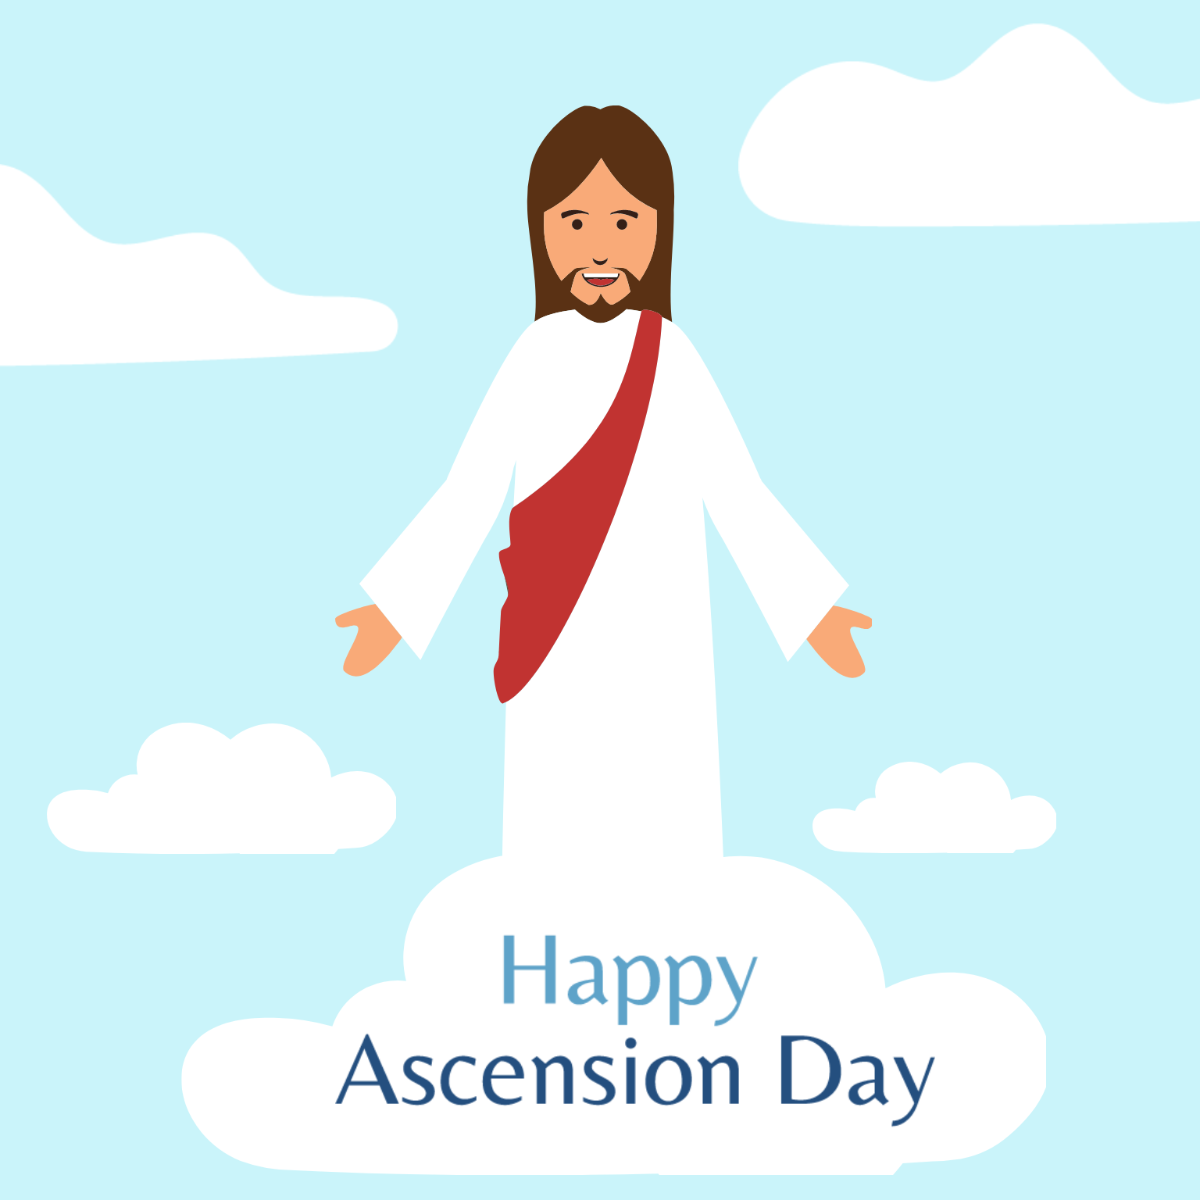 Free Happy Ascension Day Illustration Template